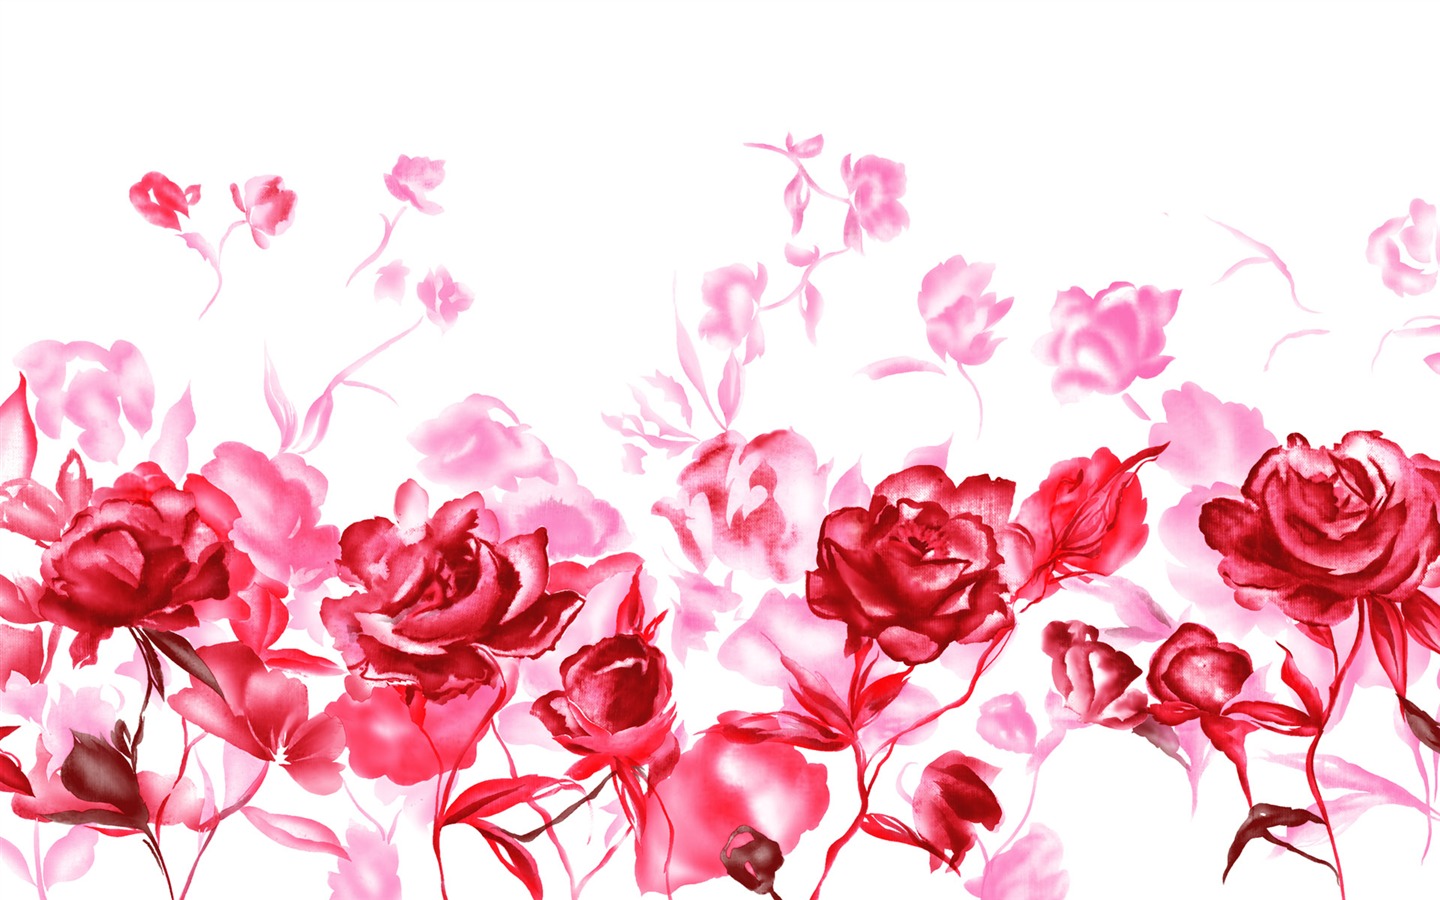 Valentine's Day Love Theme Wallpapers (3) #15 - 1440x900